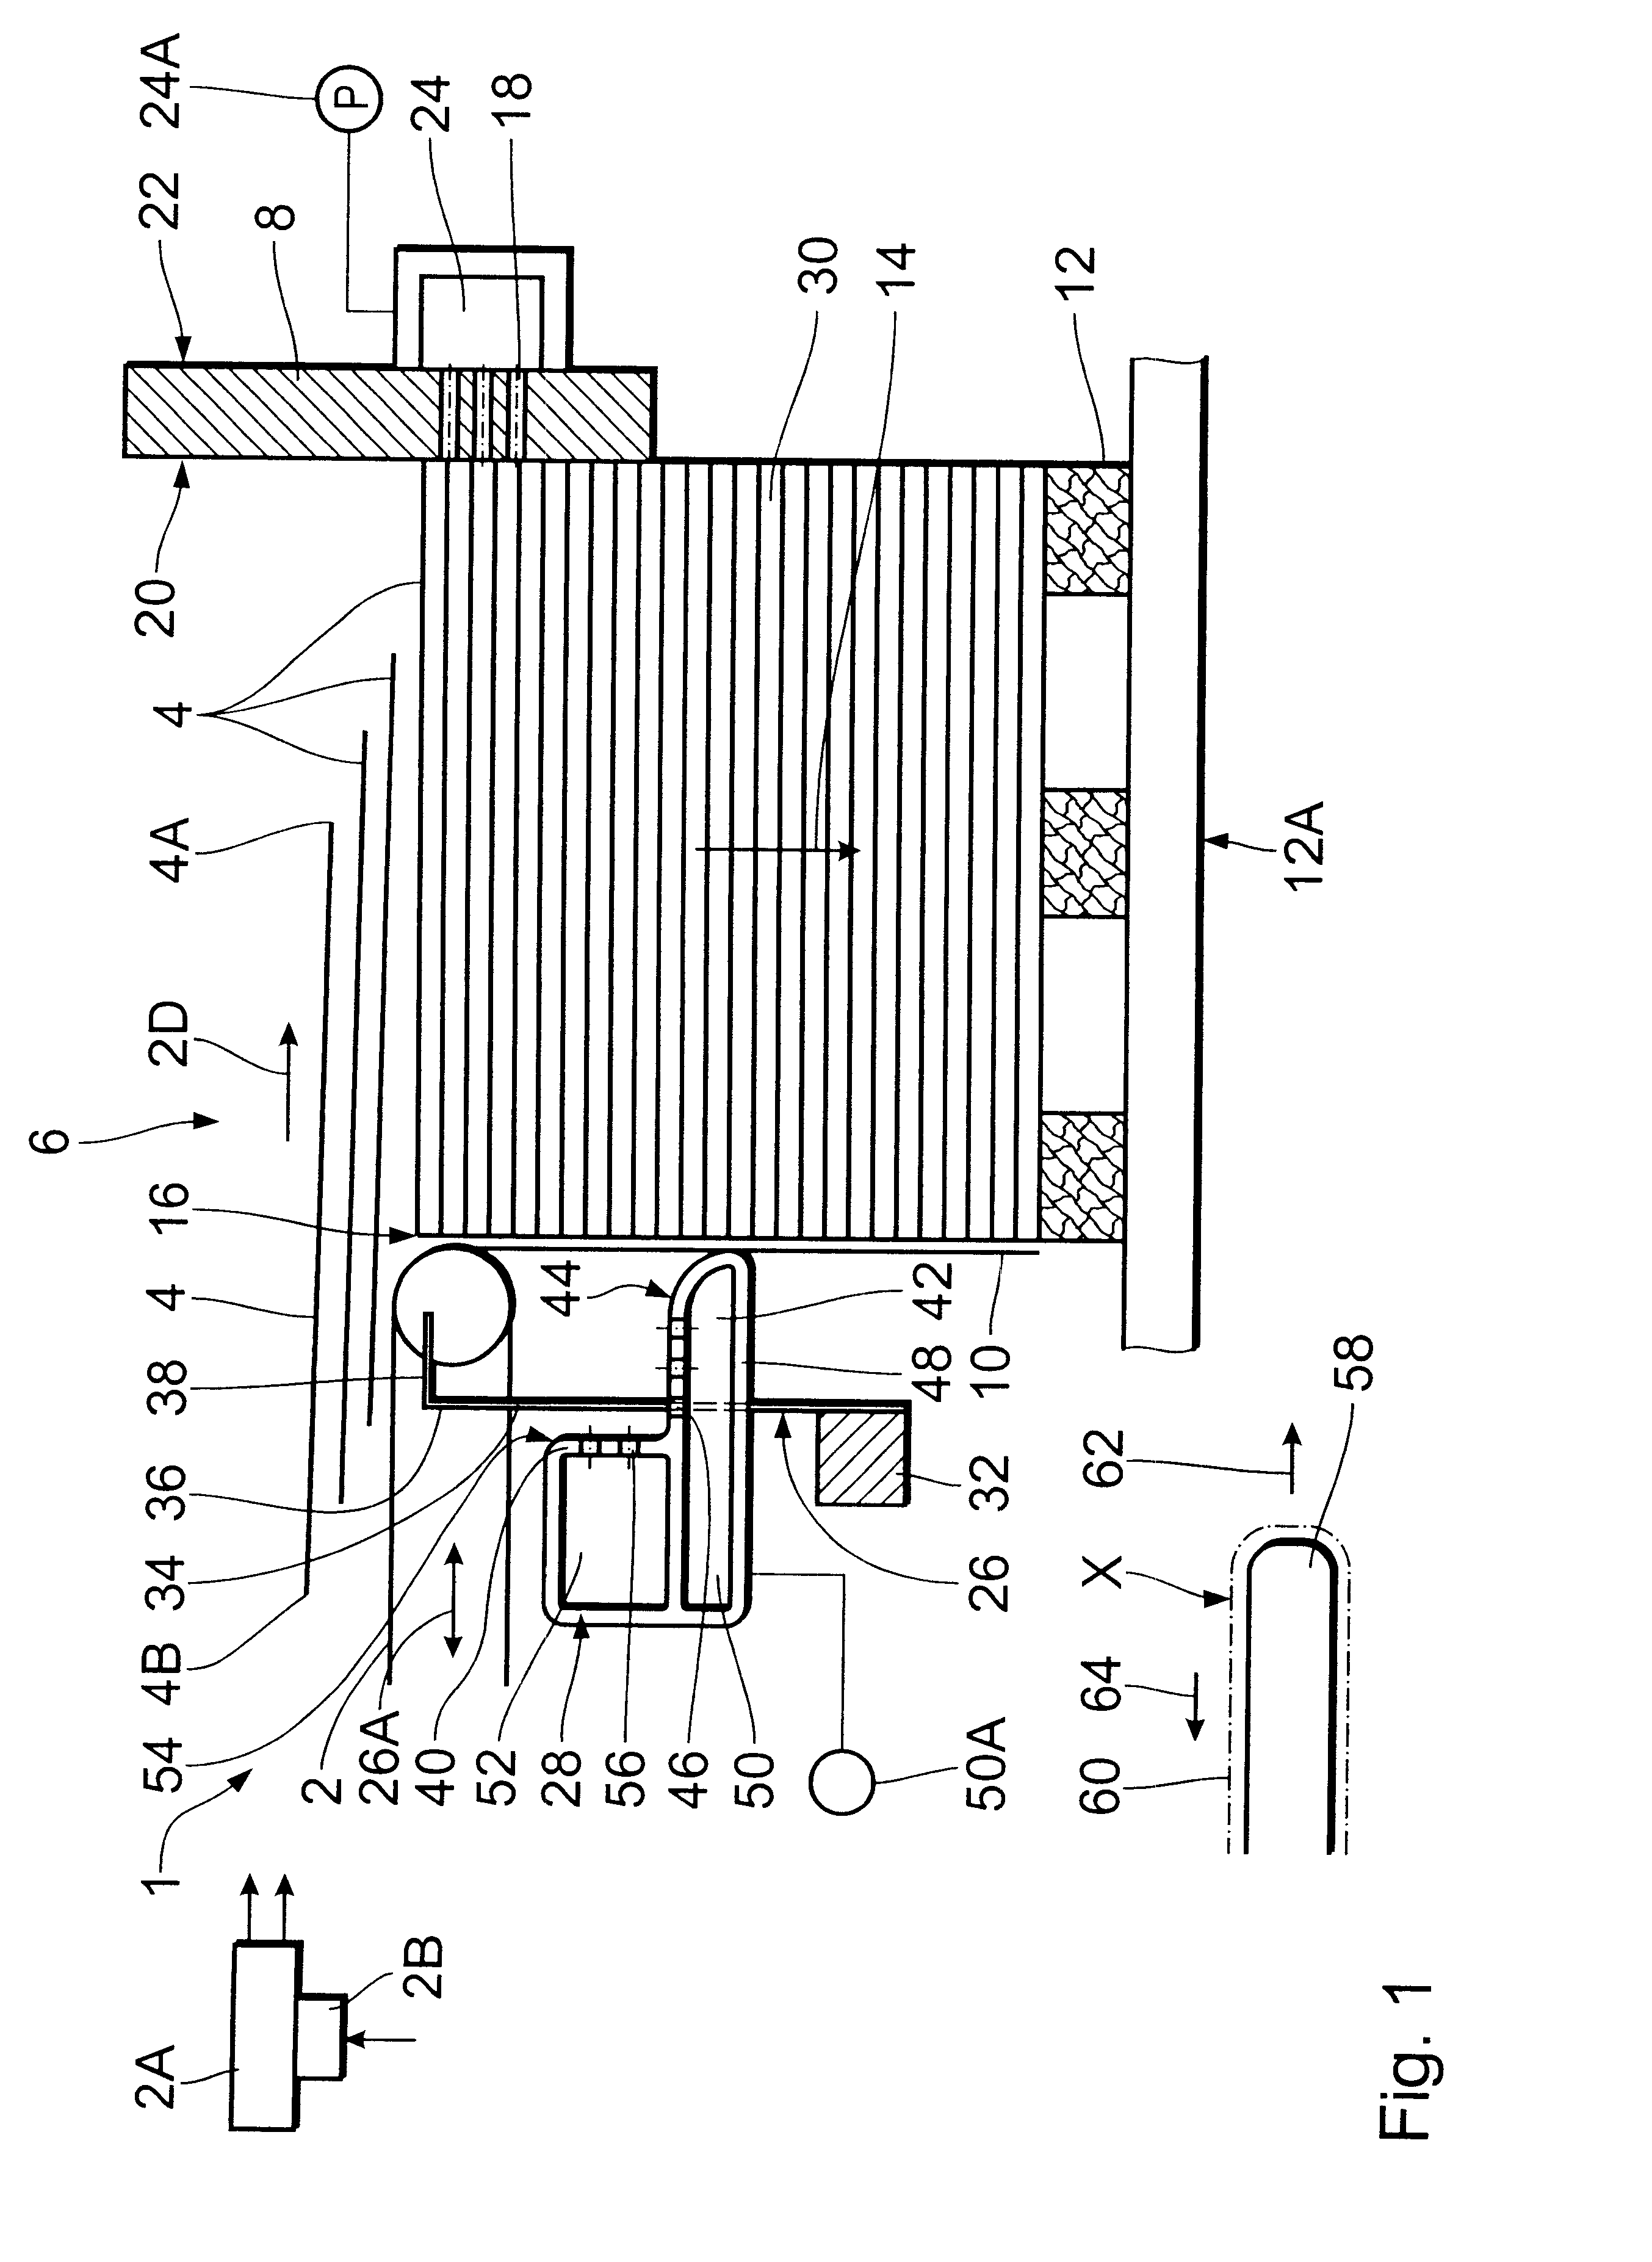 Method of and apparatus for accumulating successive stacks of superimposed sheets